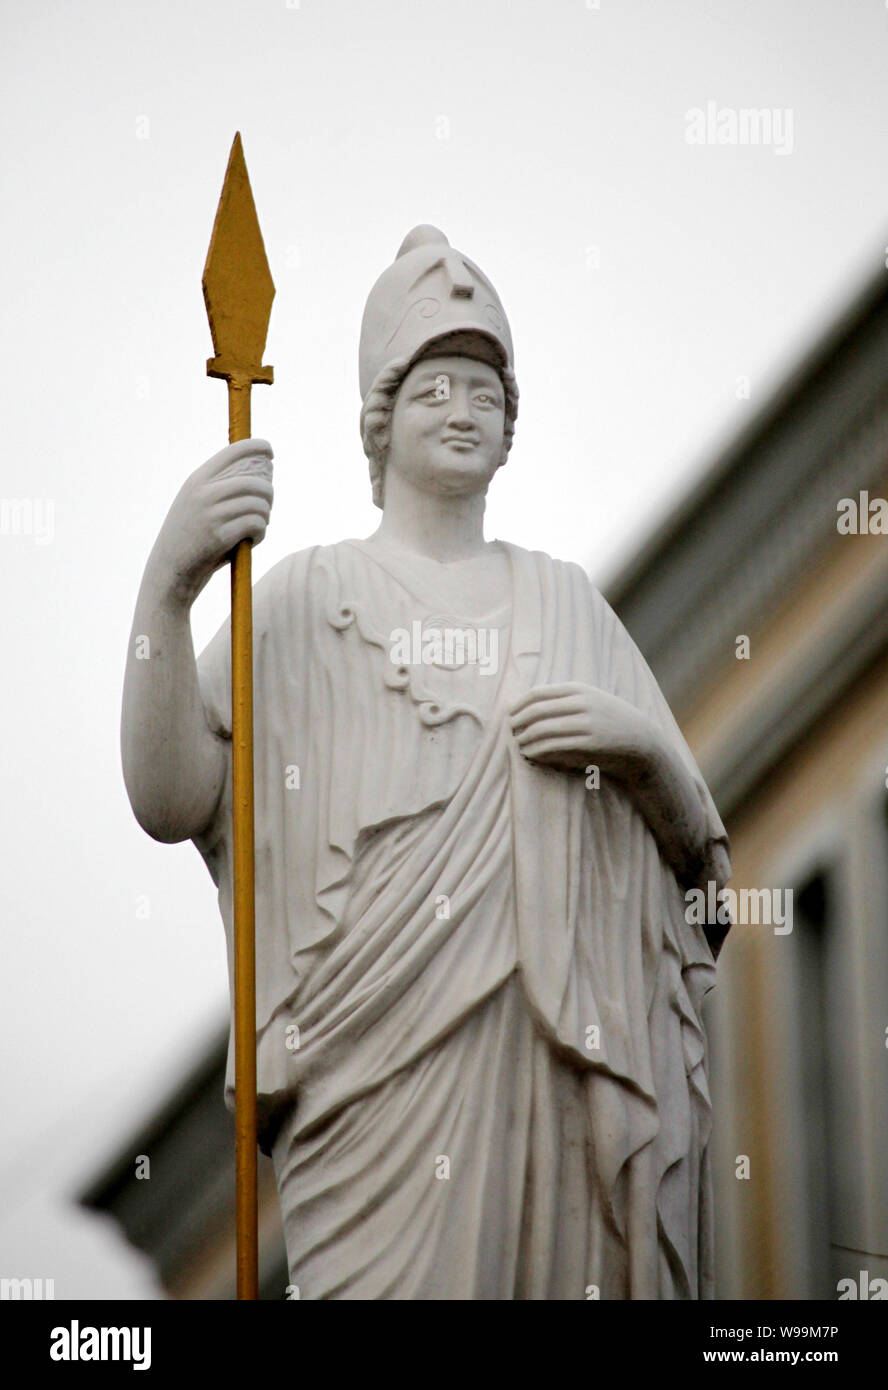 The statue of Greek mythical goddess Athena is pictured on the campus of  the Northwest University in XiAn city, northwest Chinas Shaanxi province, 7  D Stock Photo - Alamy